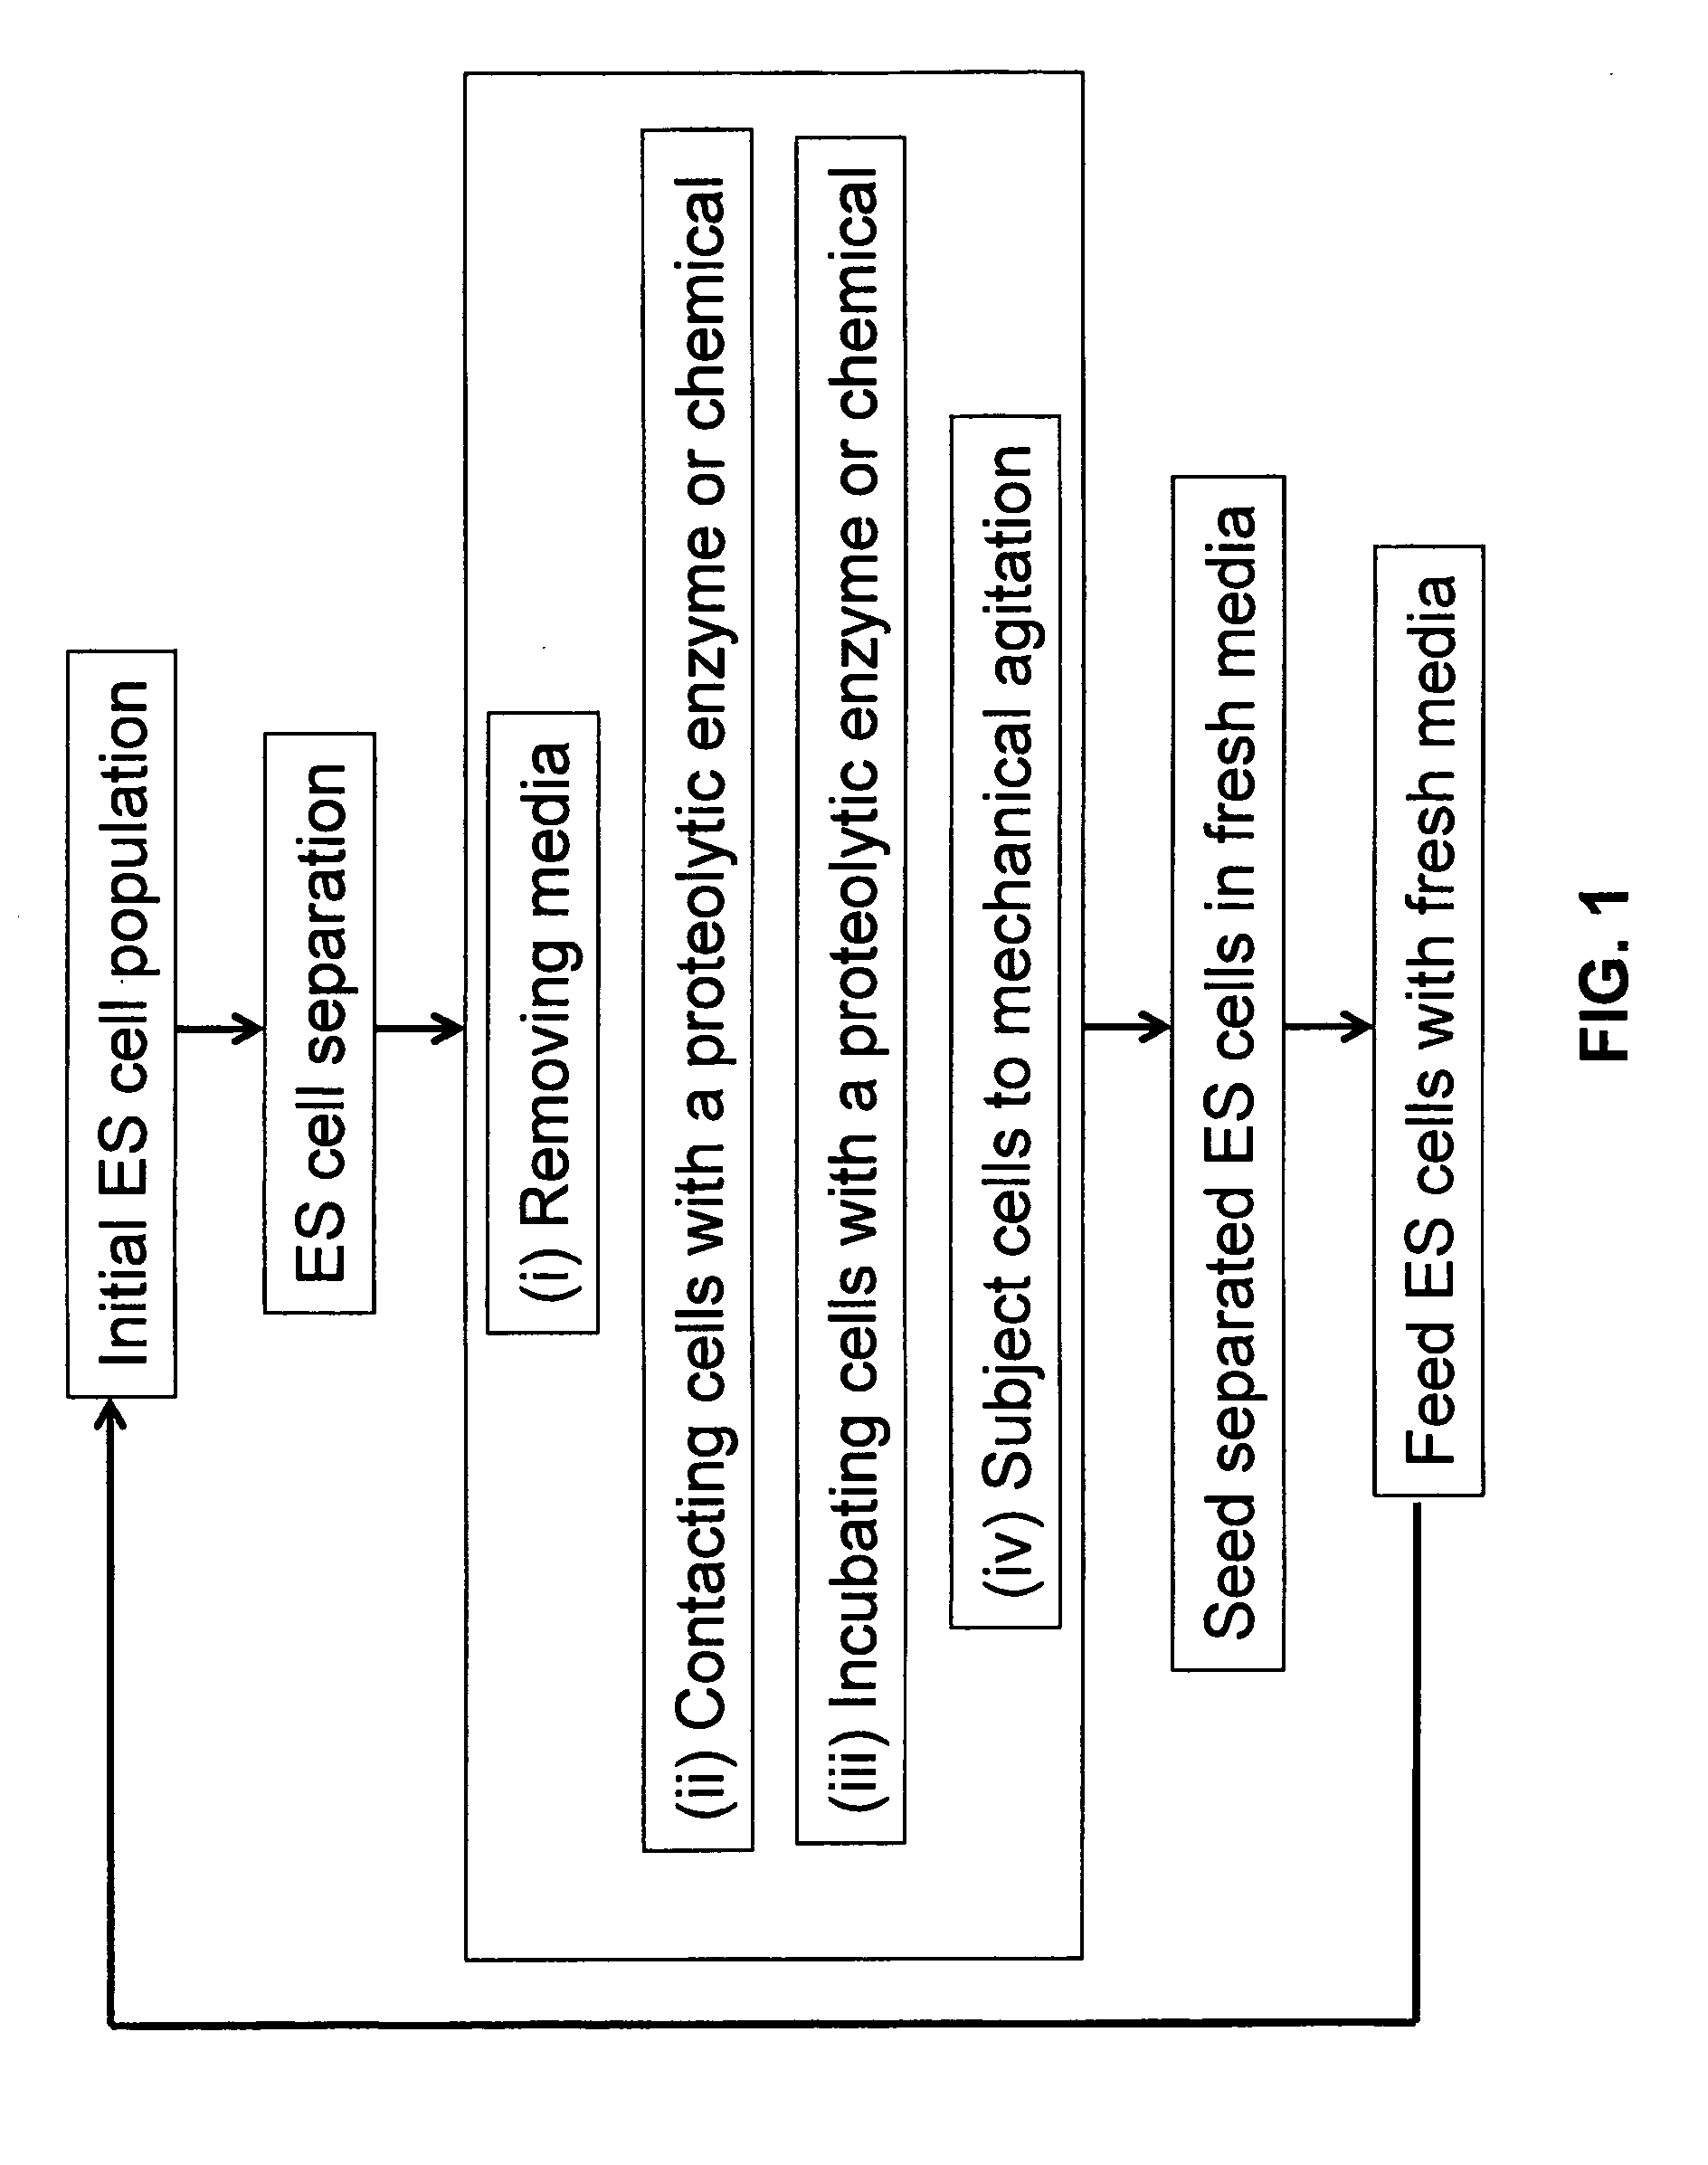 Automated method and apparatus for embryonic stem cell culture